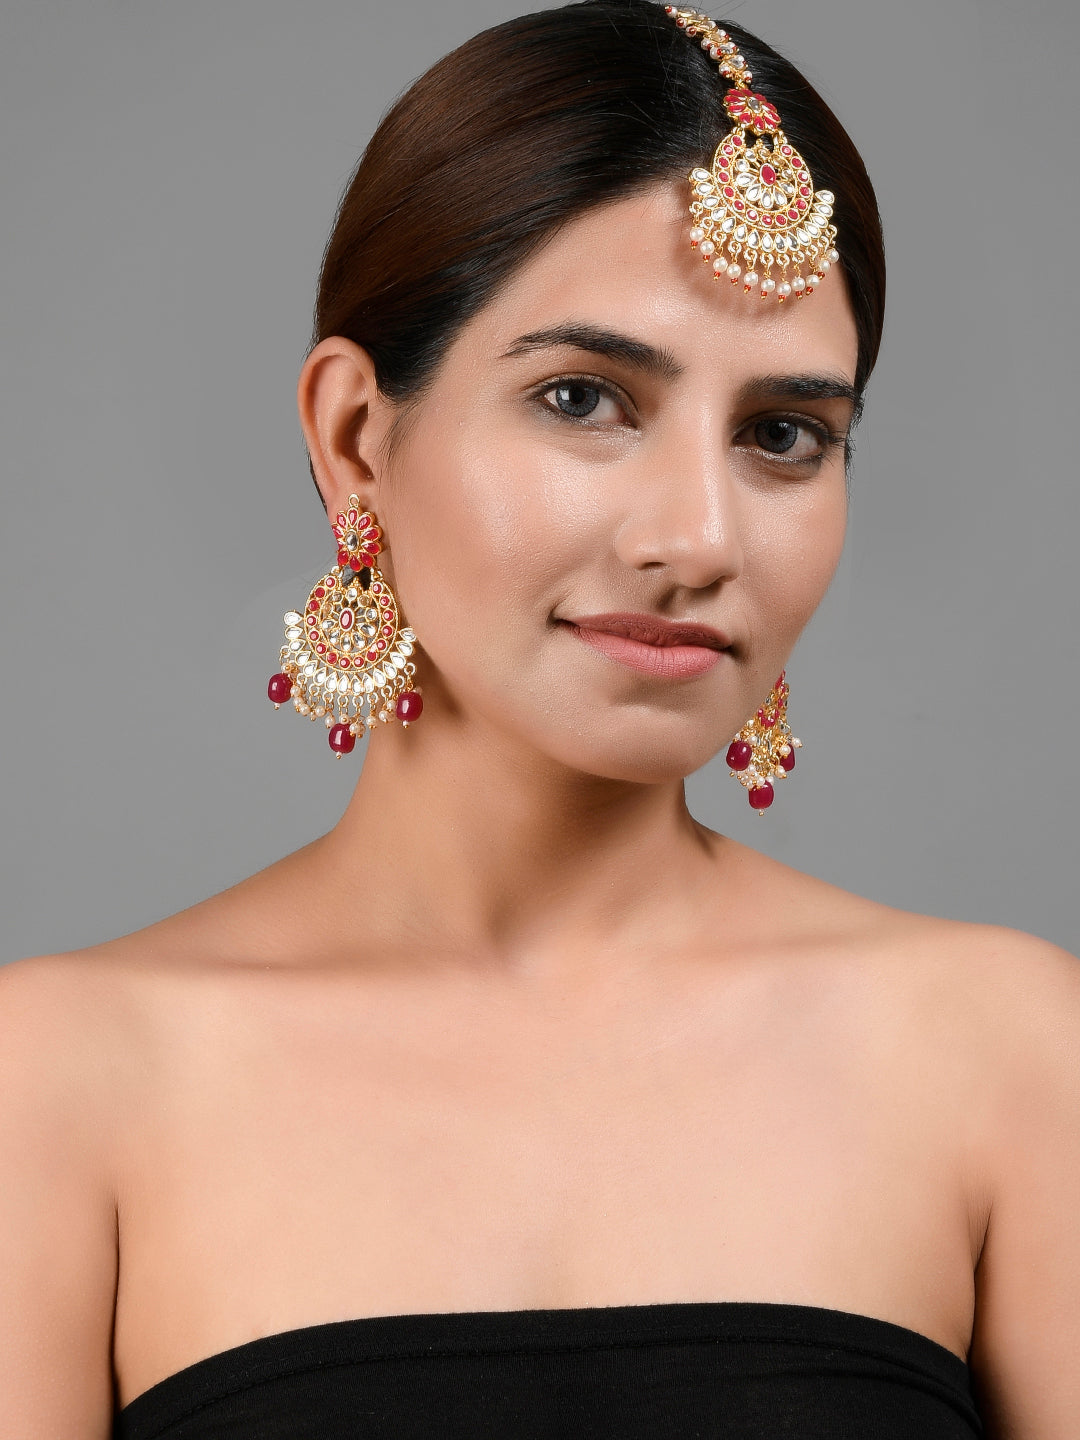 Red Gold Plated Ethnic Maangtikka With Earrings For Women